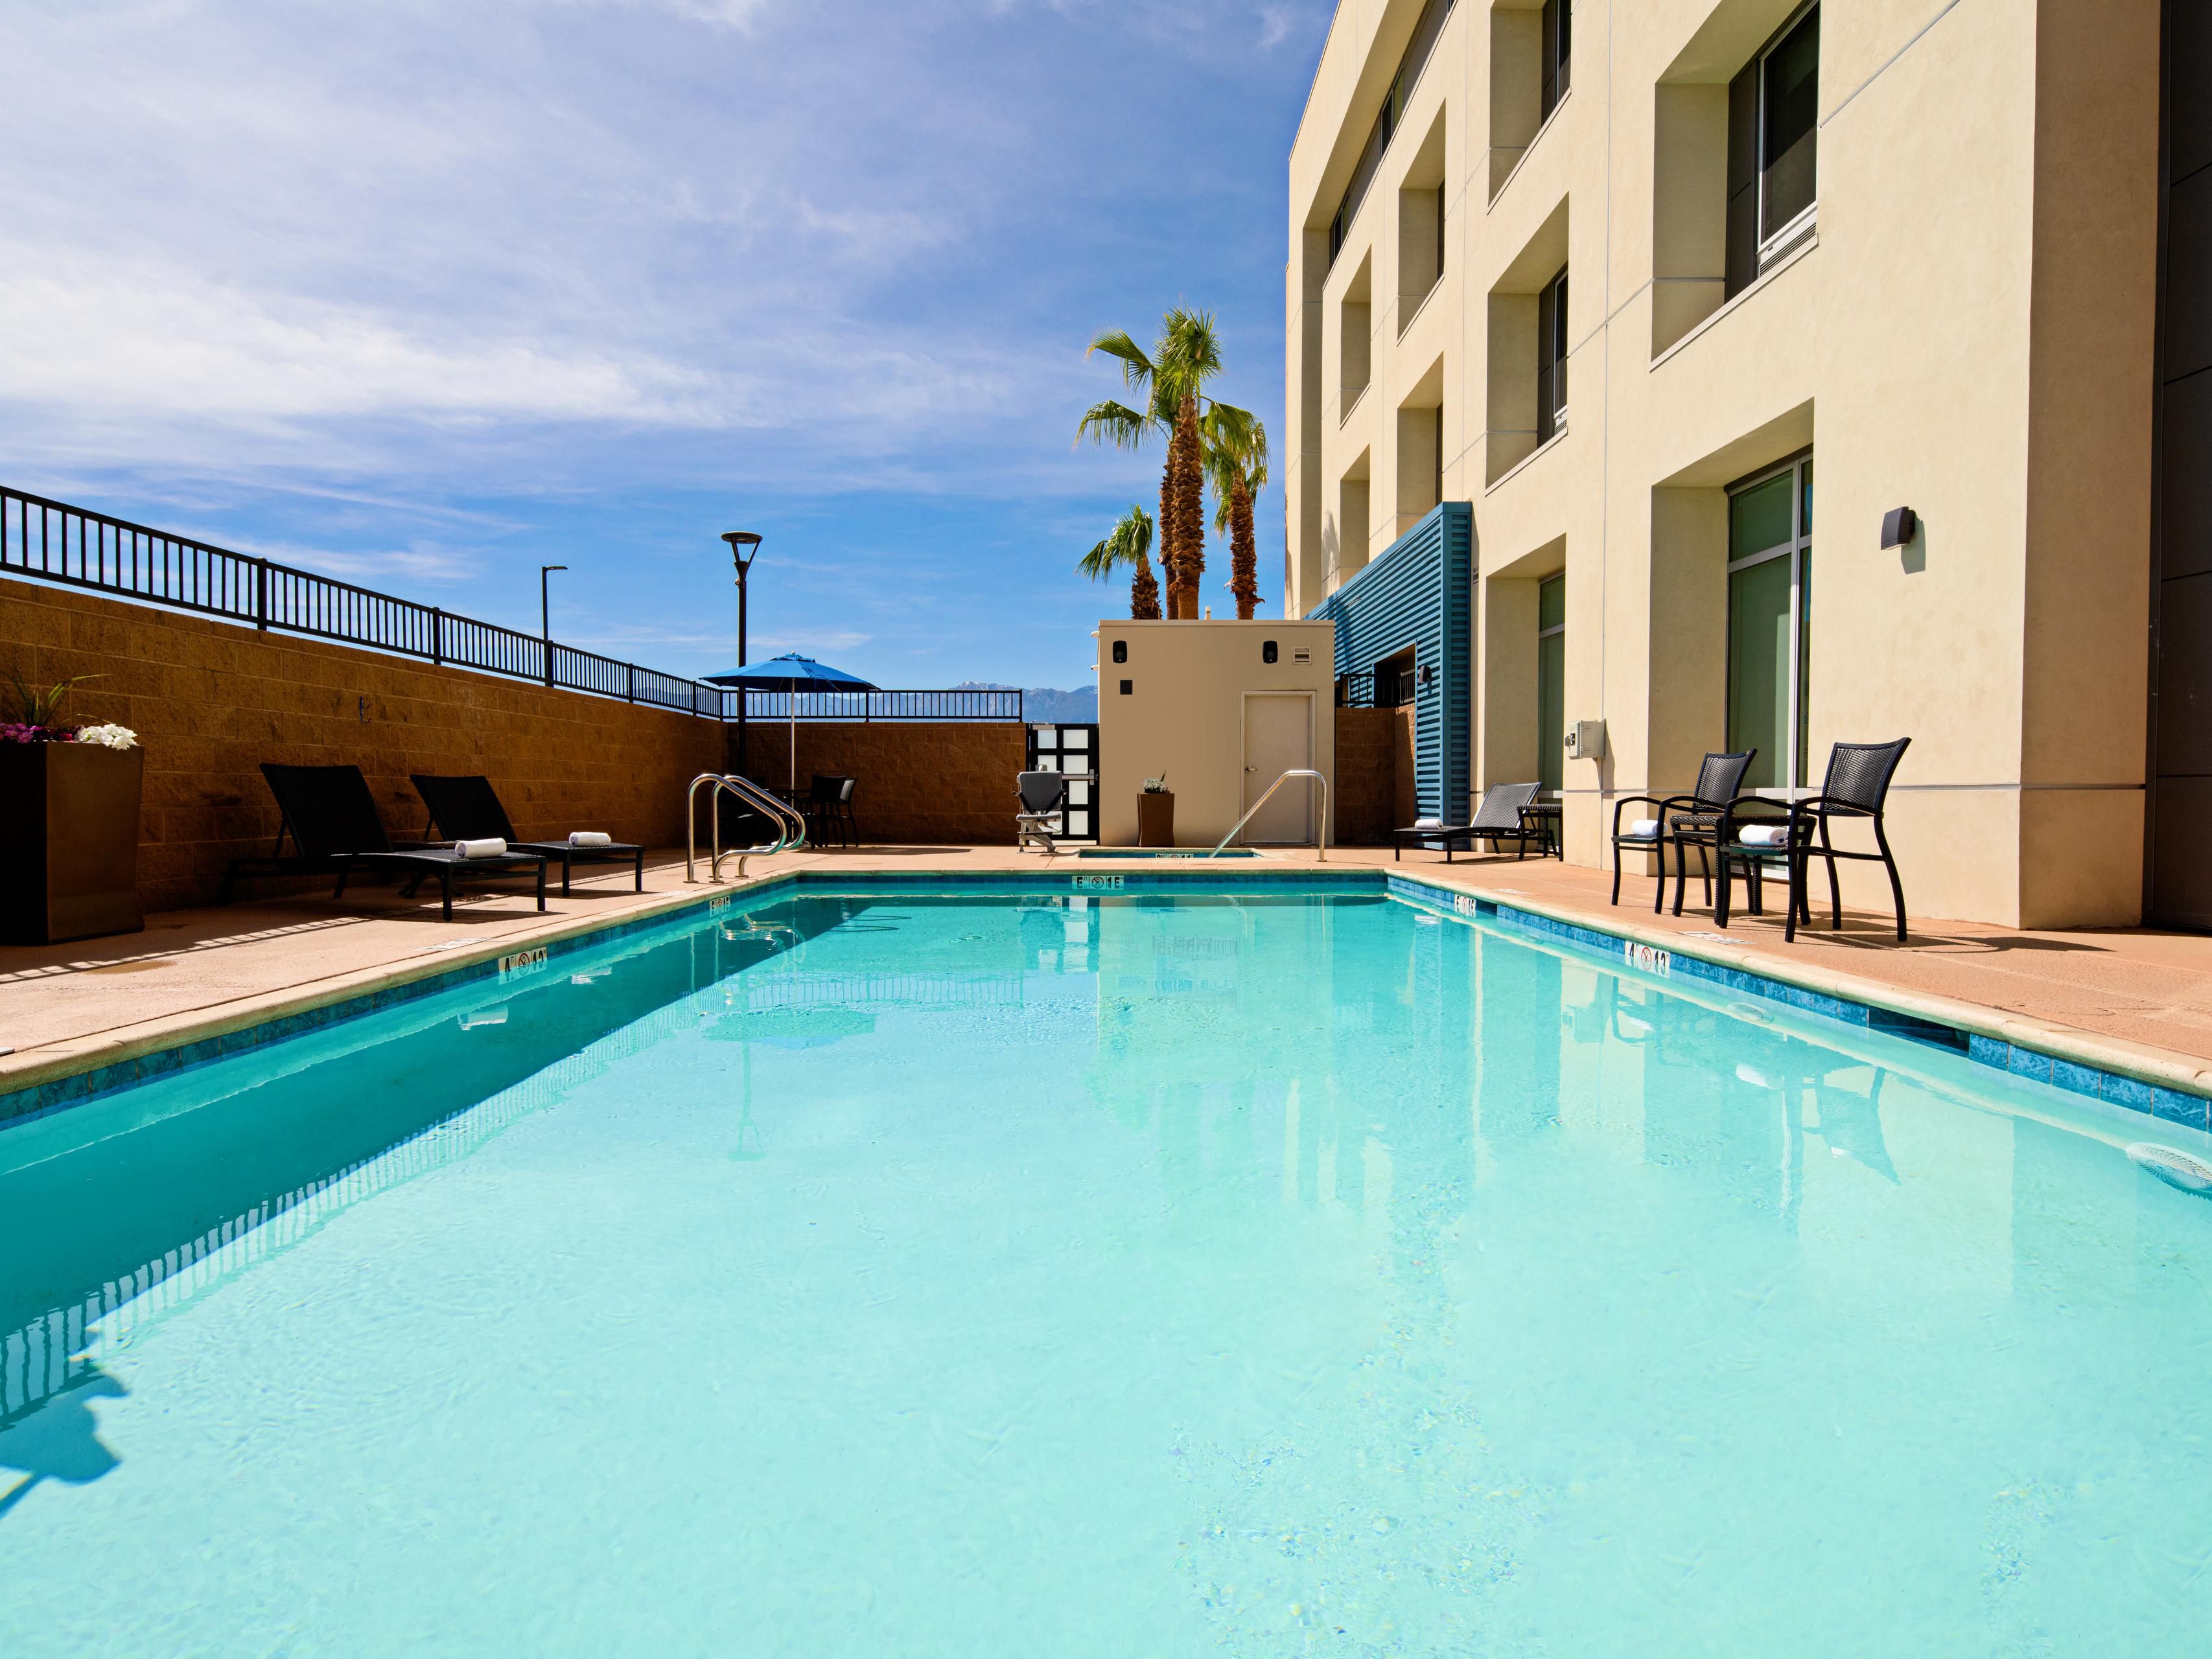 Take a Splash In Our Pool